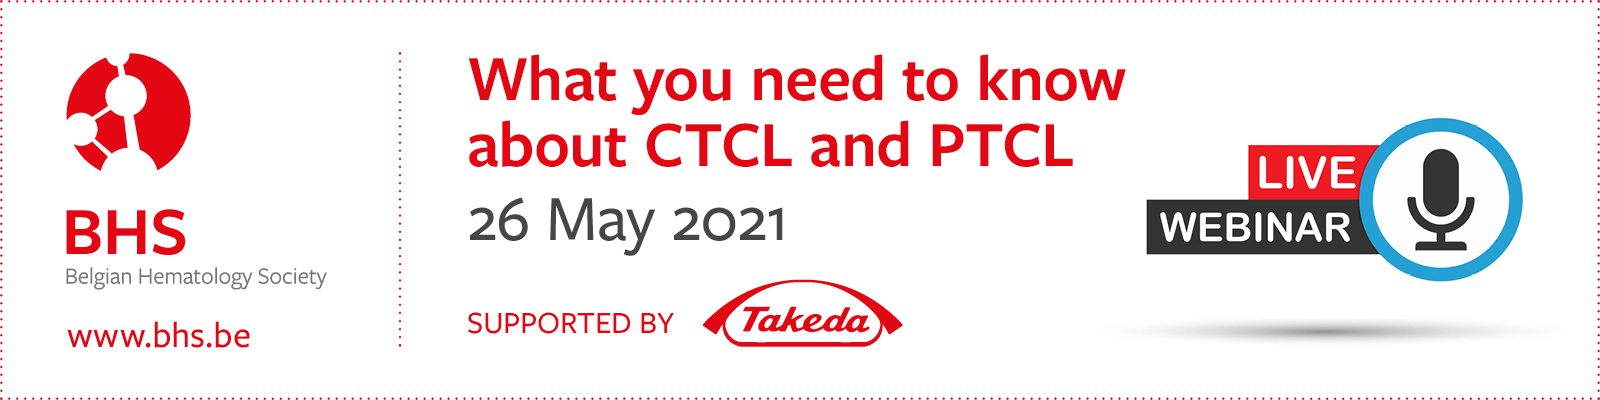 What you need to know about CTCL and PTCL; BHS - Takeda Webinar